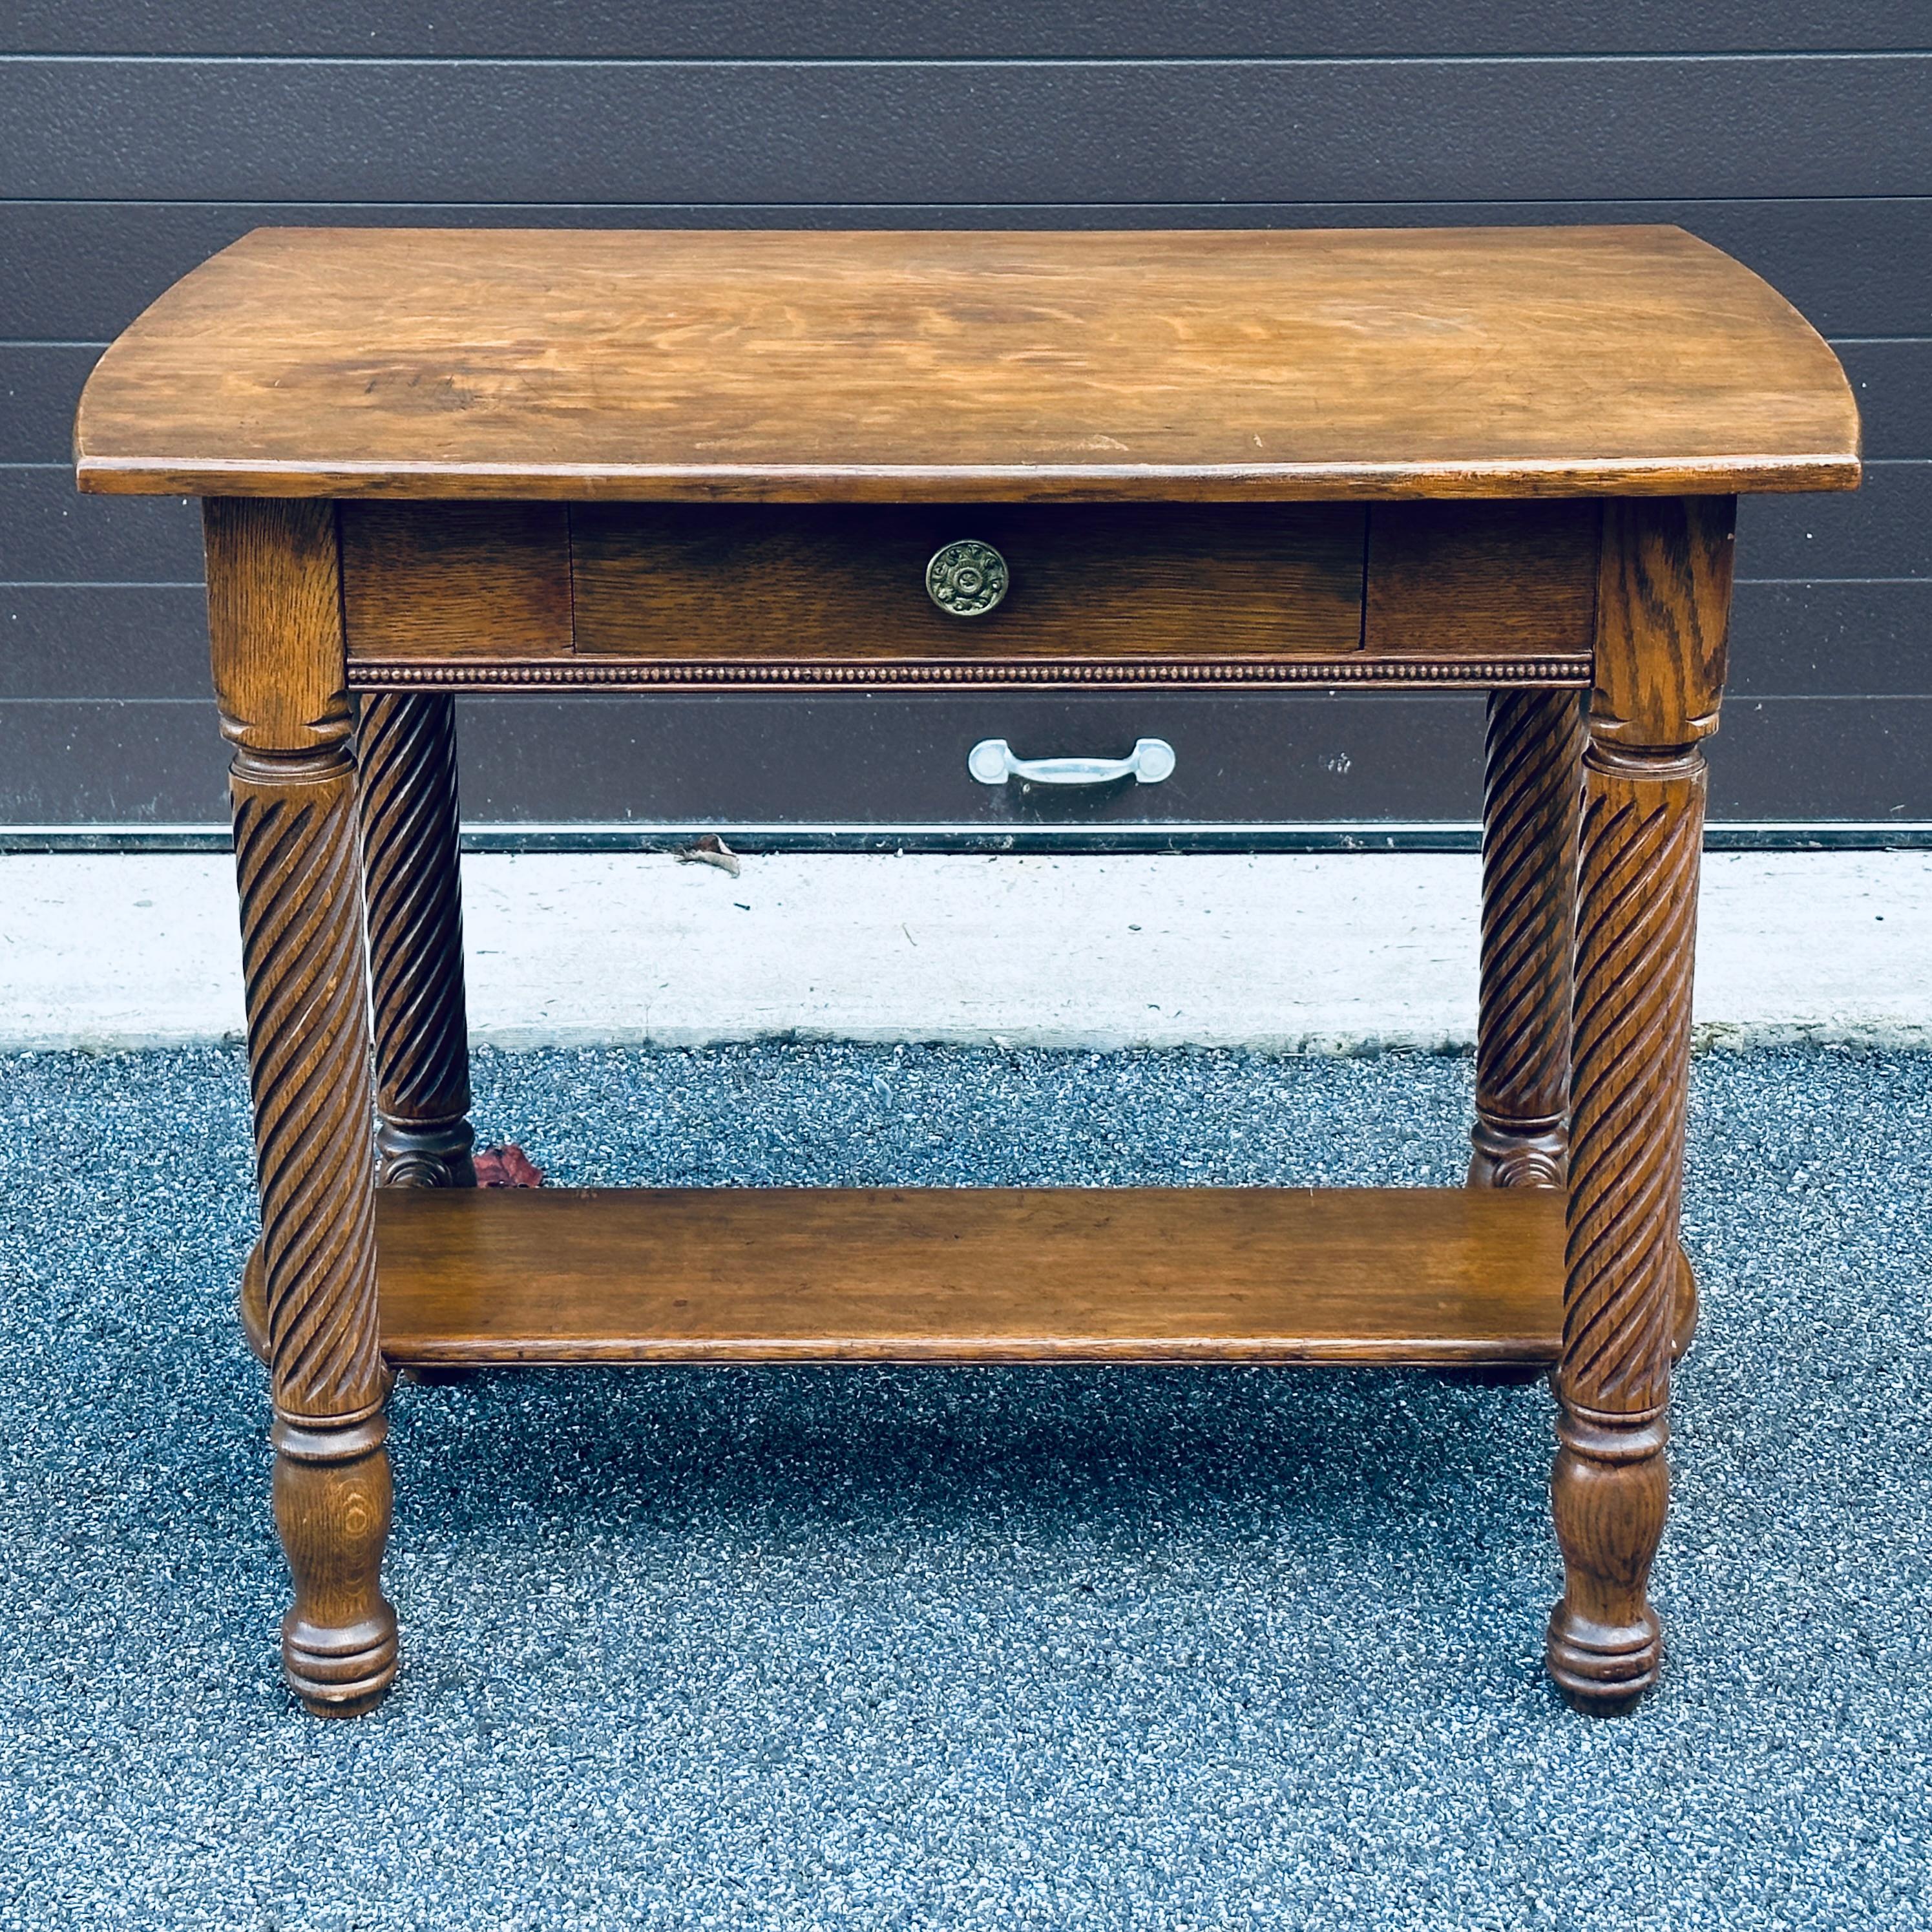 Antique quartersawn solid oak library table with spiral twist carved legs and single drawer.